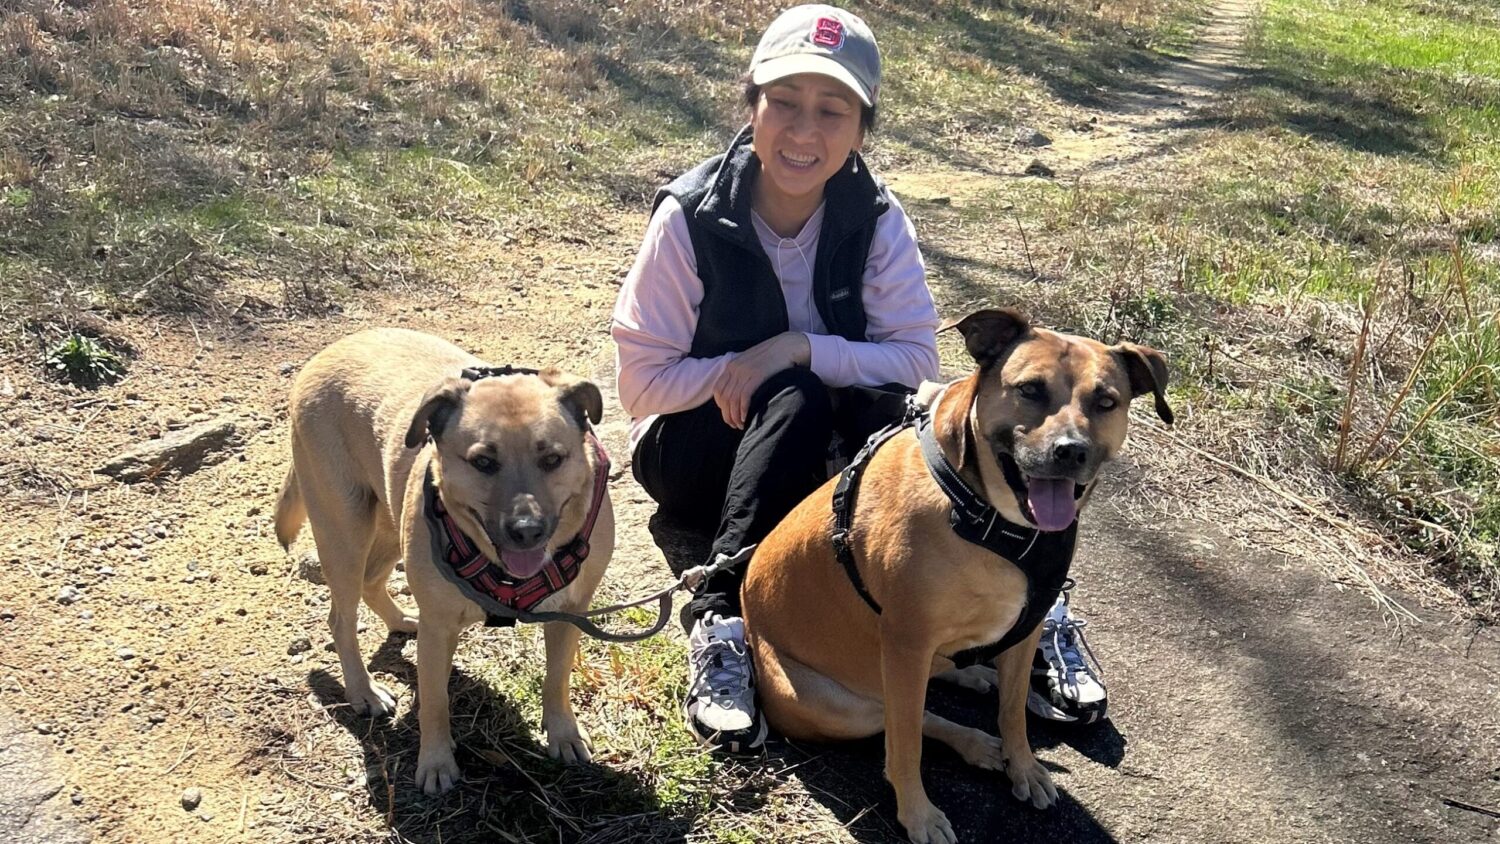 Loi with dogs - Meet Loi Tran - Forest Biomaterials NC State University